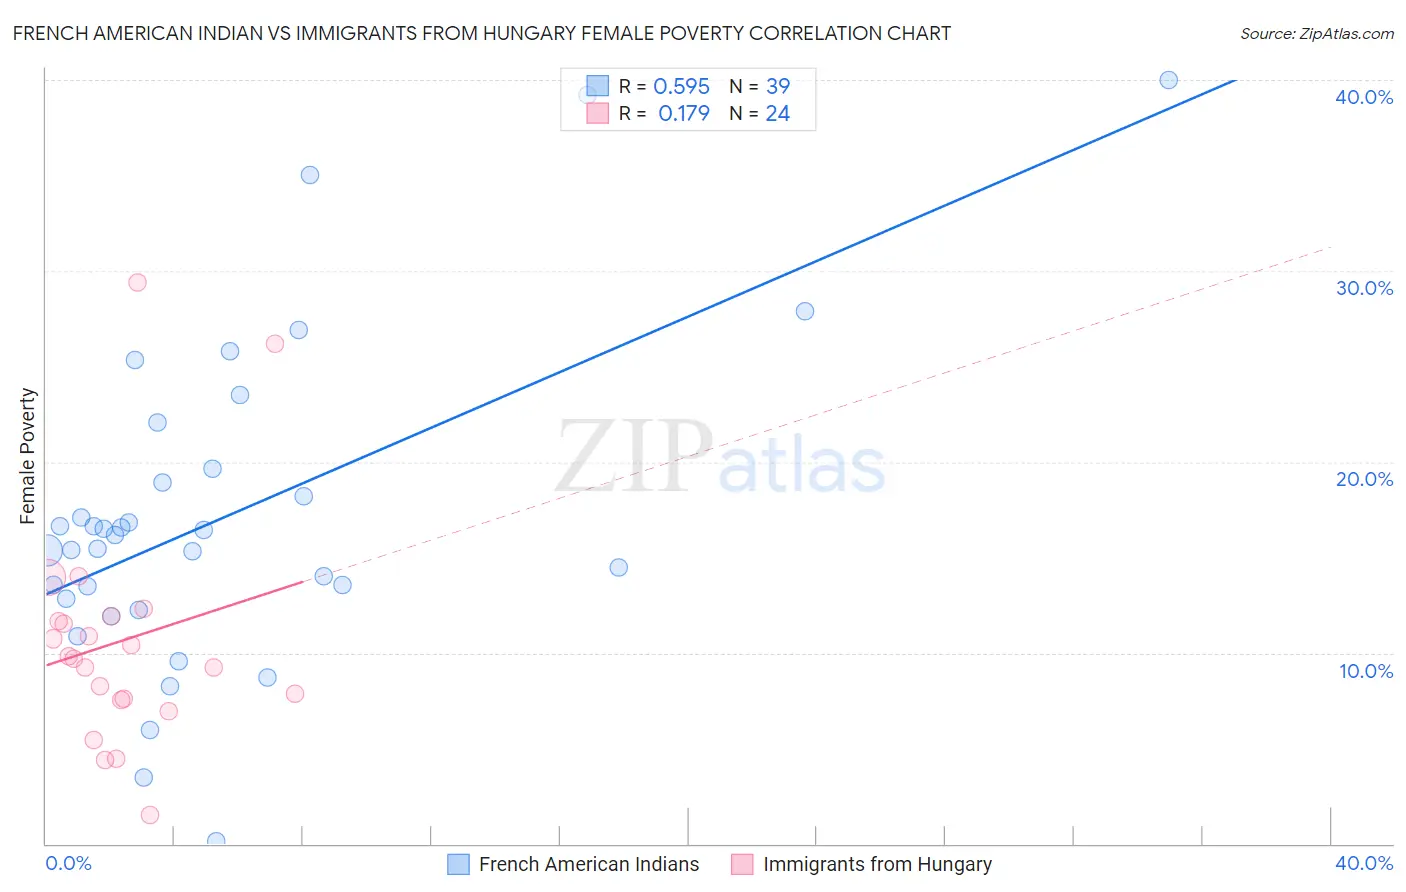 French American Indian vs Immigrants from Hungary Female Poverty